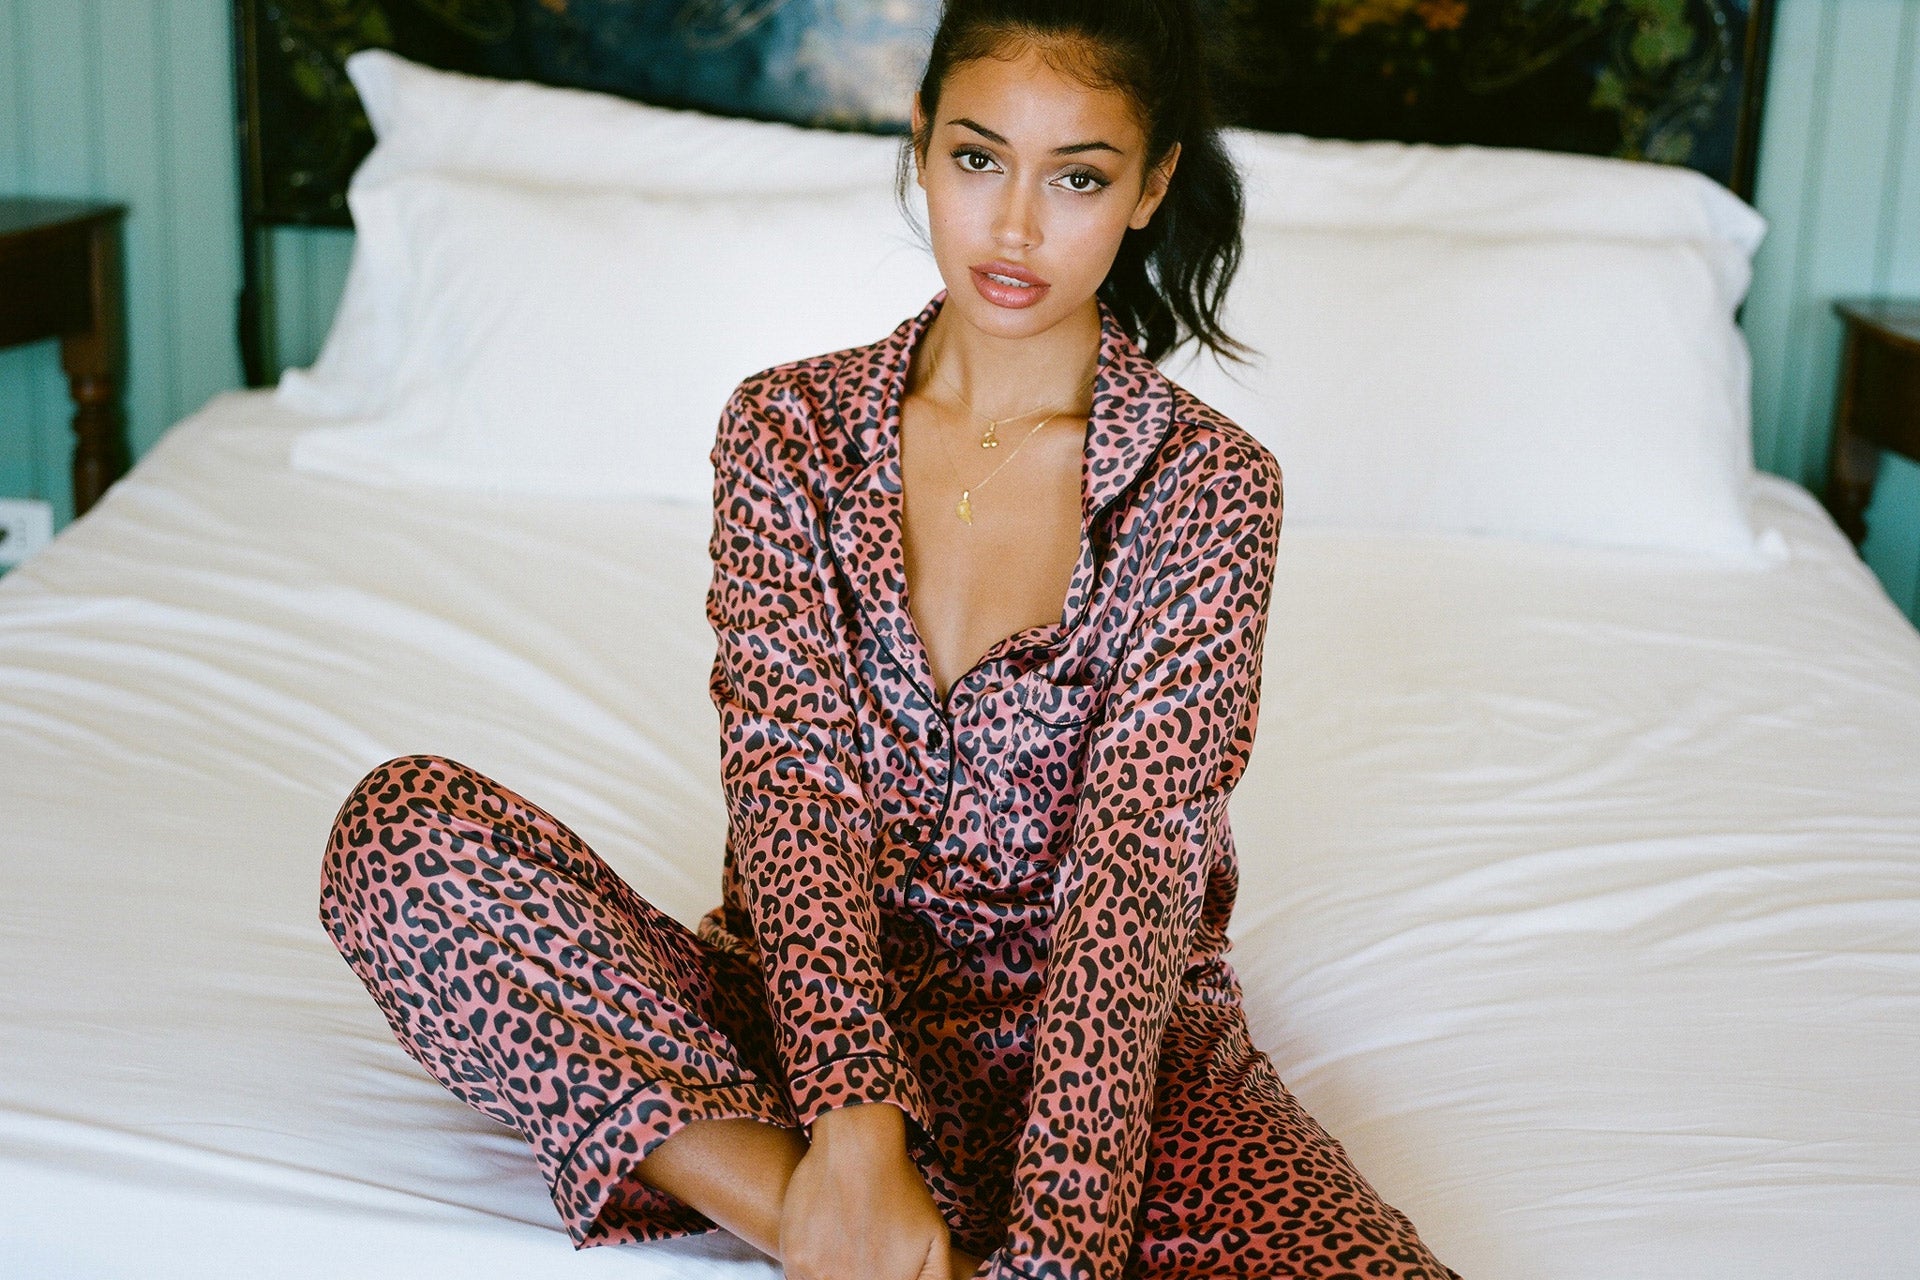 Cindy Kimberly wearing the Delight Peach Leopard Print PJ